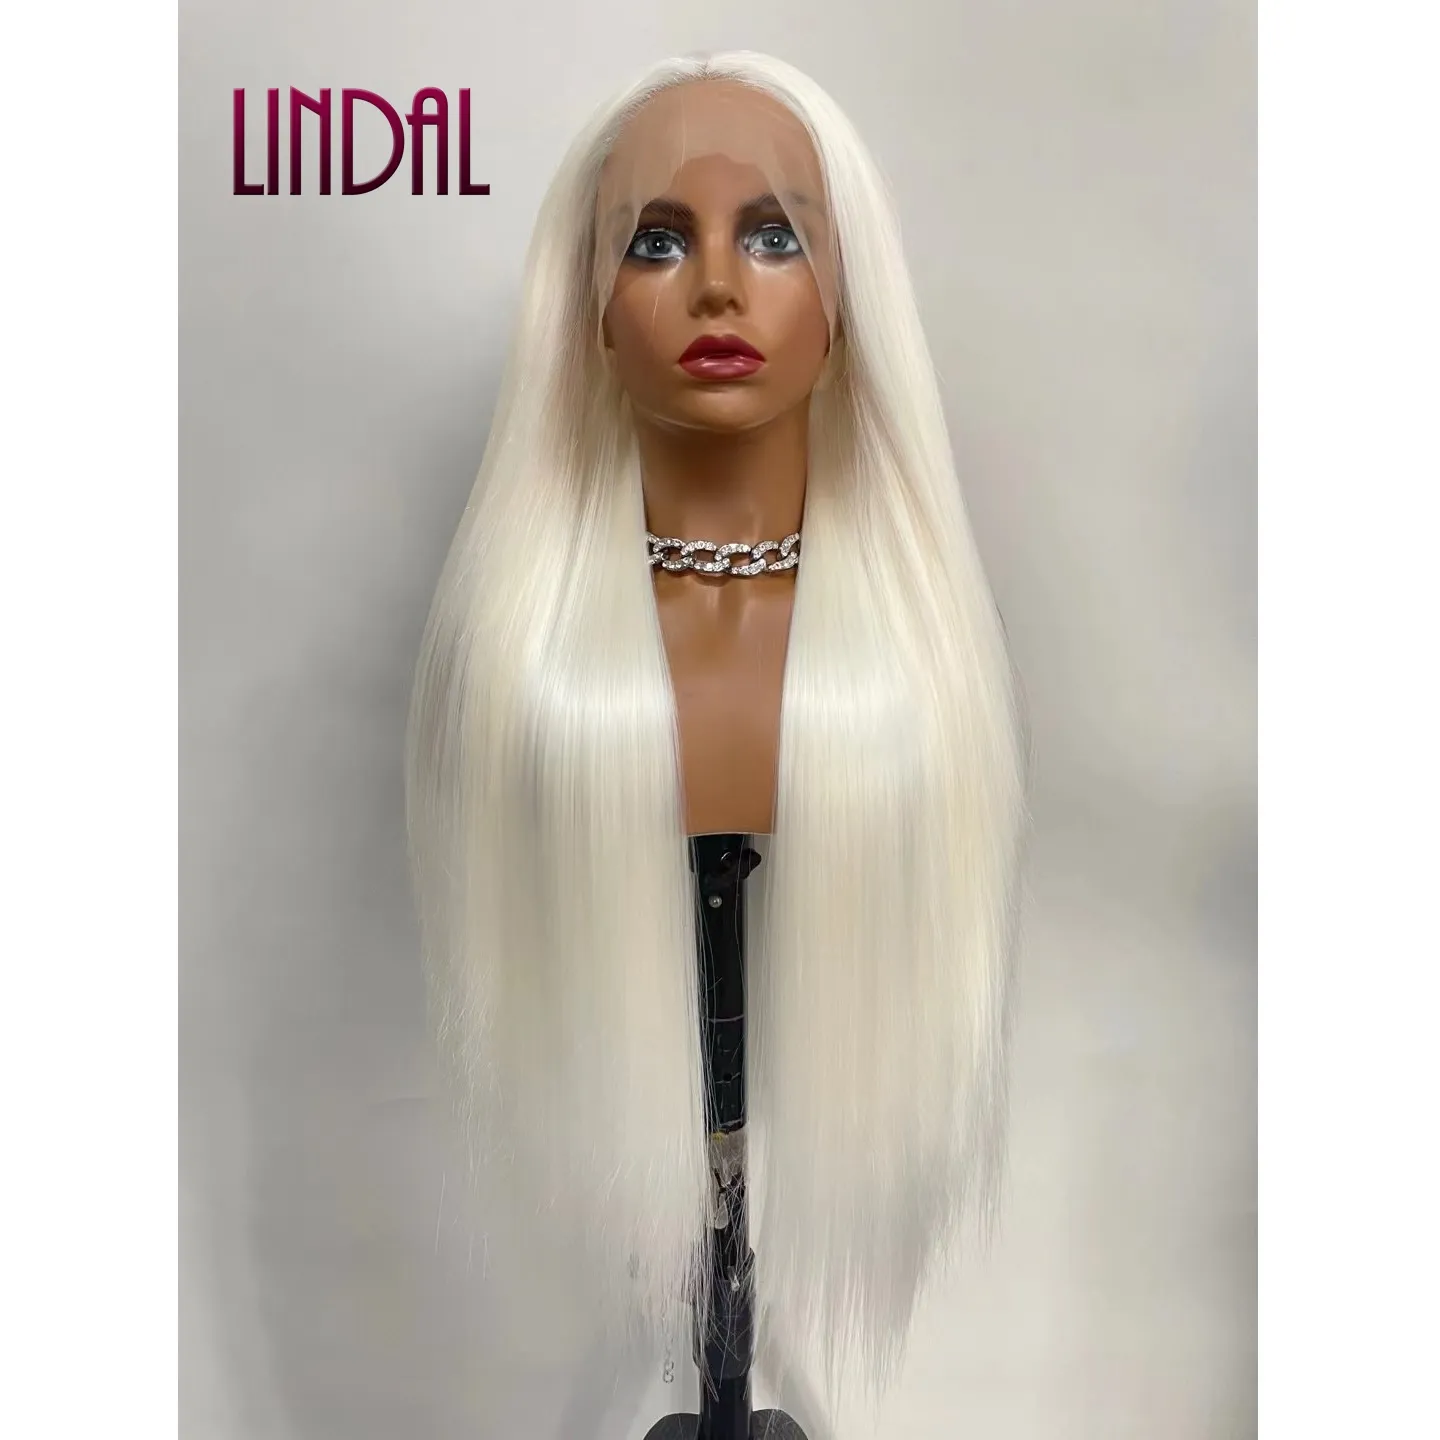 LINDAL best futura fiber synthetic wigs synthetic fiber hair wigs blonde synthetic long straight lace front wigs